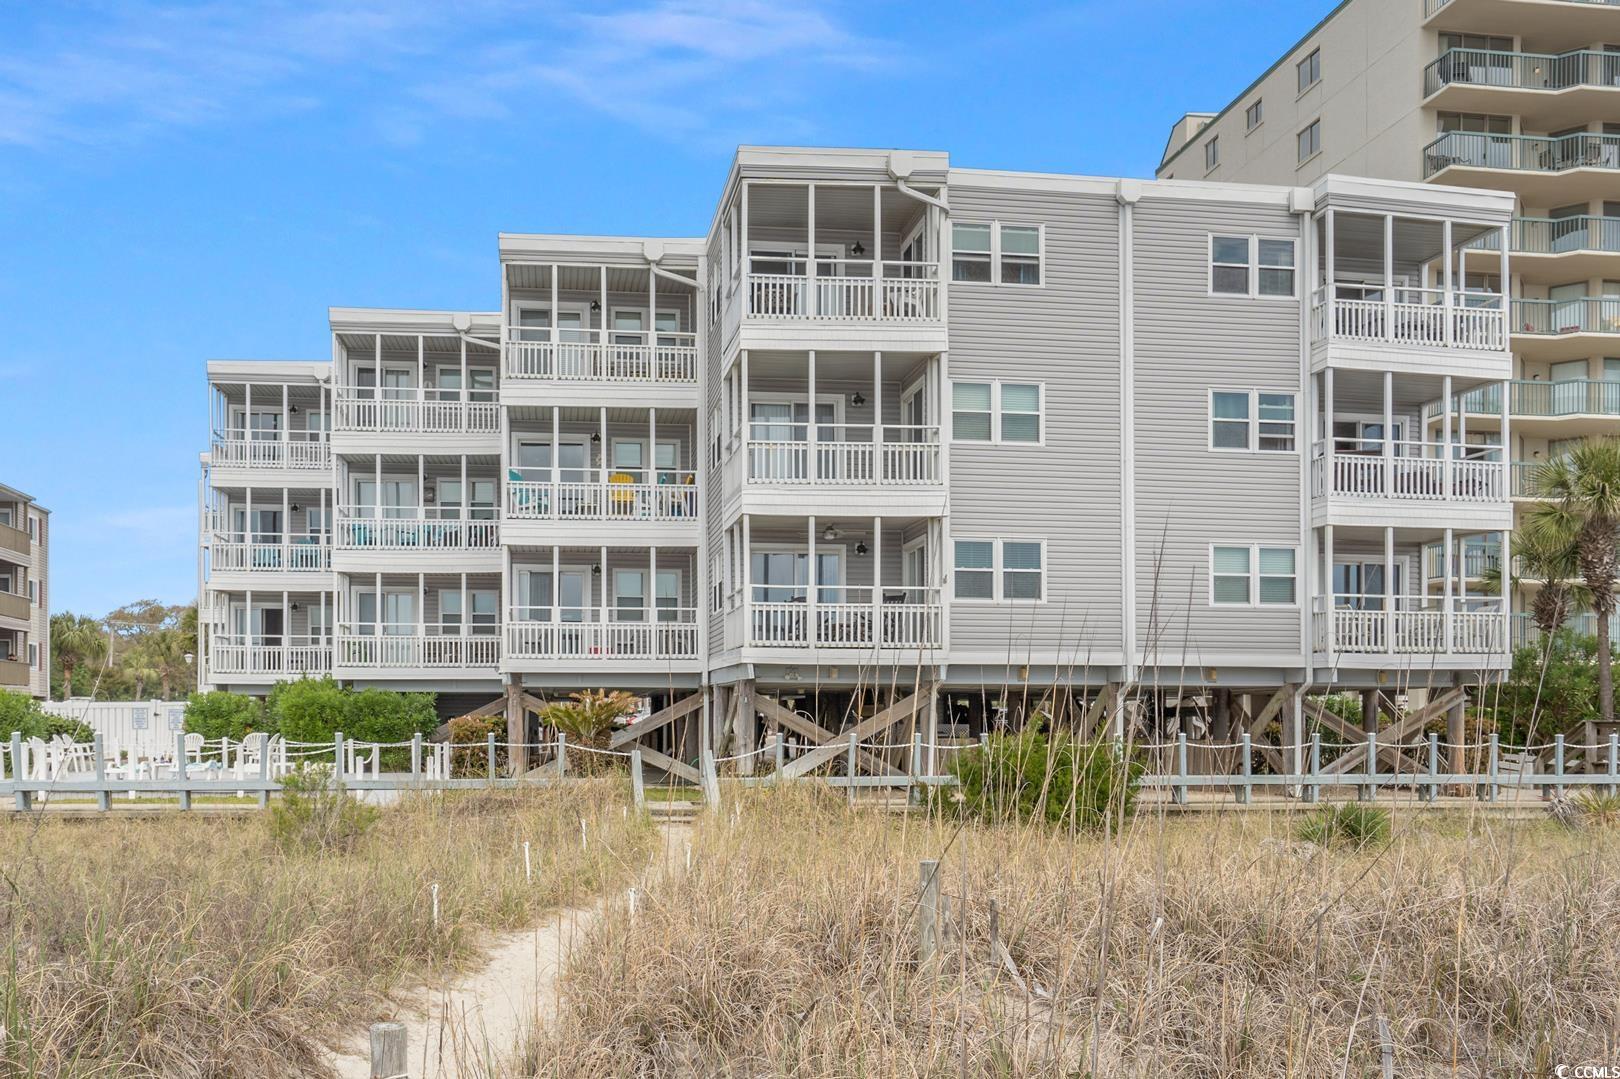 top floor, direct oceanfront, nicely furnished, corner unit in windsong in the windy hill section of north myrtle beach. this unit has been completely renovated and updated with so much to offer including lvp flooring, flat ceilings, granite countertops, remodeled (open) kitchen, subway tile backsplash, nice fixtures, nice window treatments, replaced exterior windows and doors, complete master bath remodel, walk-in tiled shower, new vanities and toilets, laundry room, and access to oceanfront balcony from the primary bedroom and living room. this amazing unit has tremendous oceanfront and coastline views and is fully equipped ready to move into, rent, or use as a second home. complex has pool and an oceanfront sun deck.